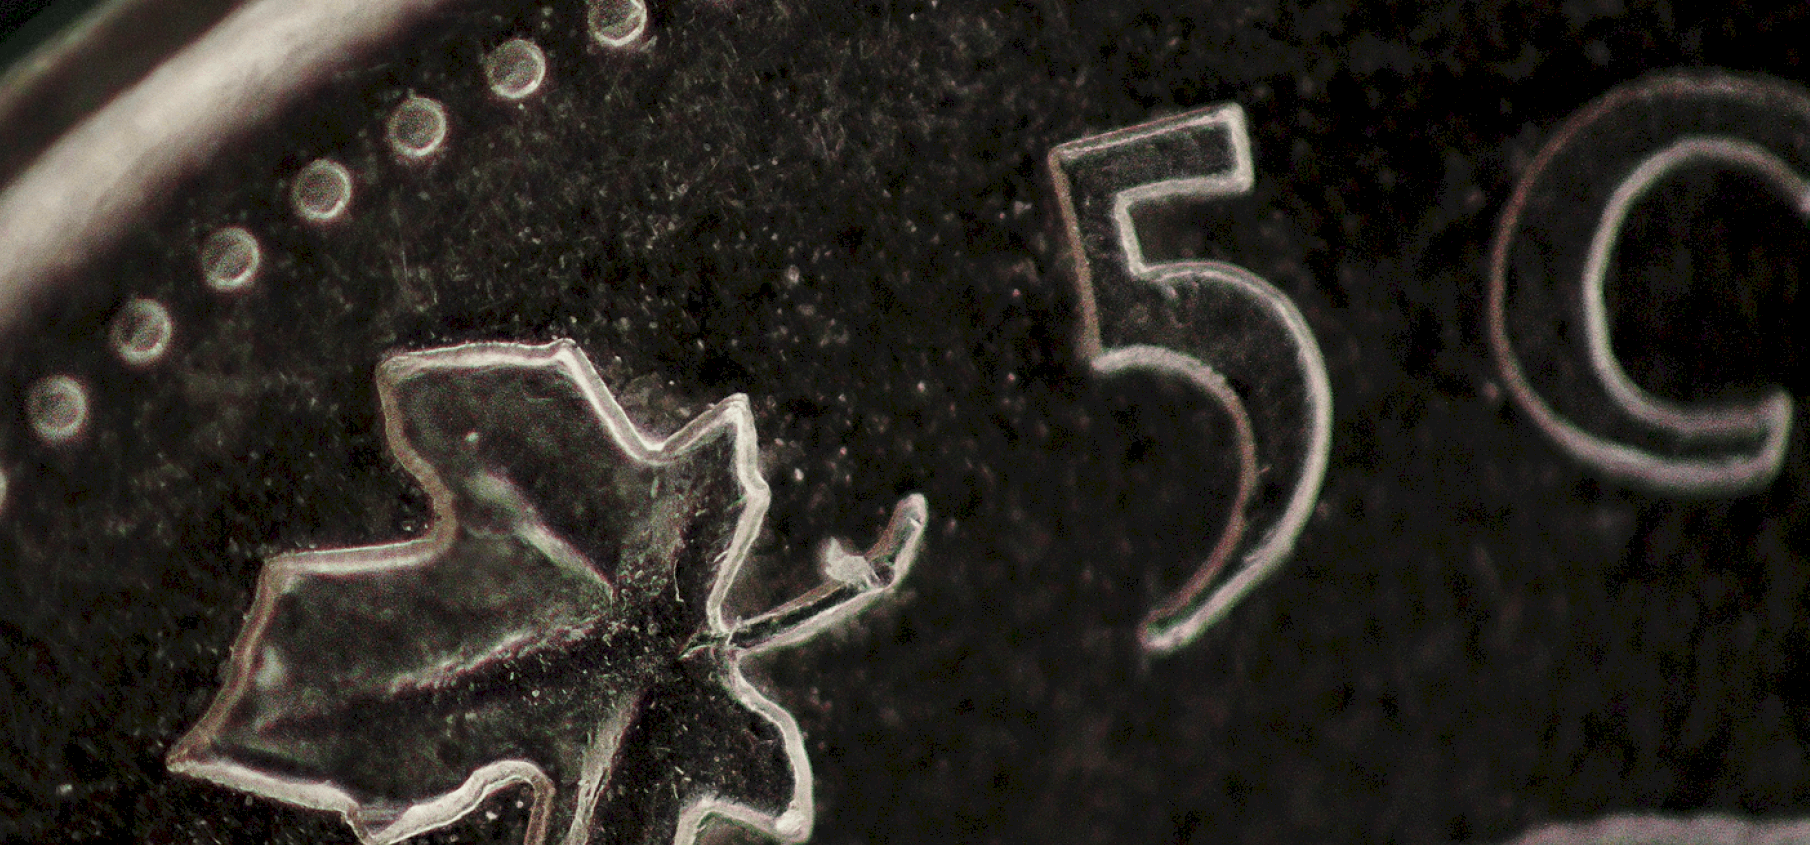 close-up picture of the Canadian 5 cent coin